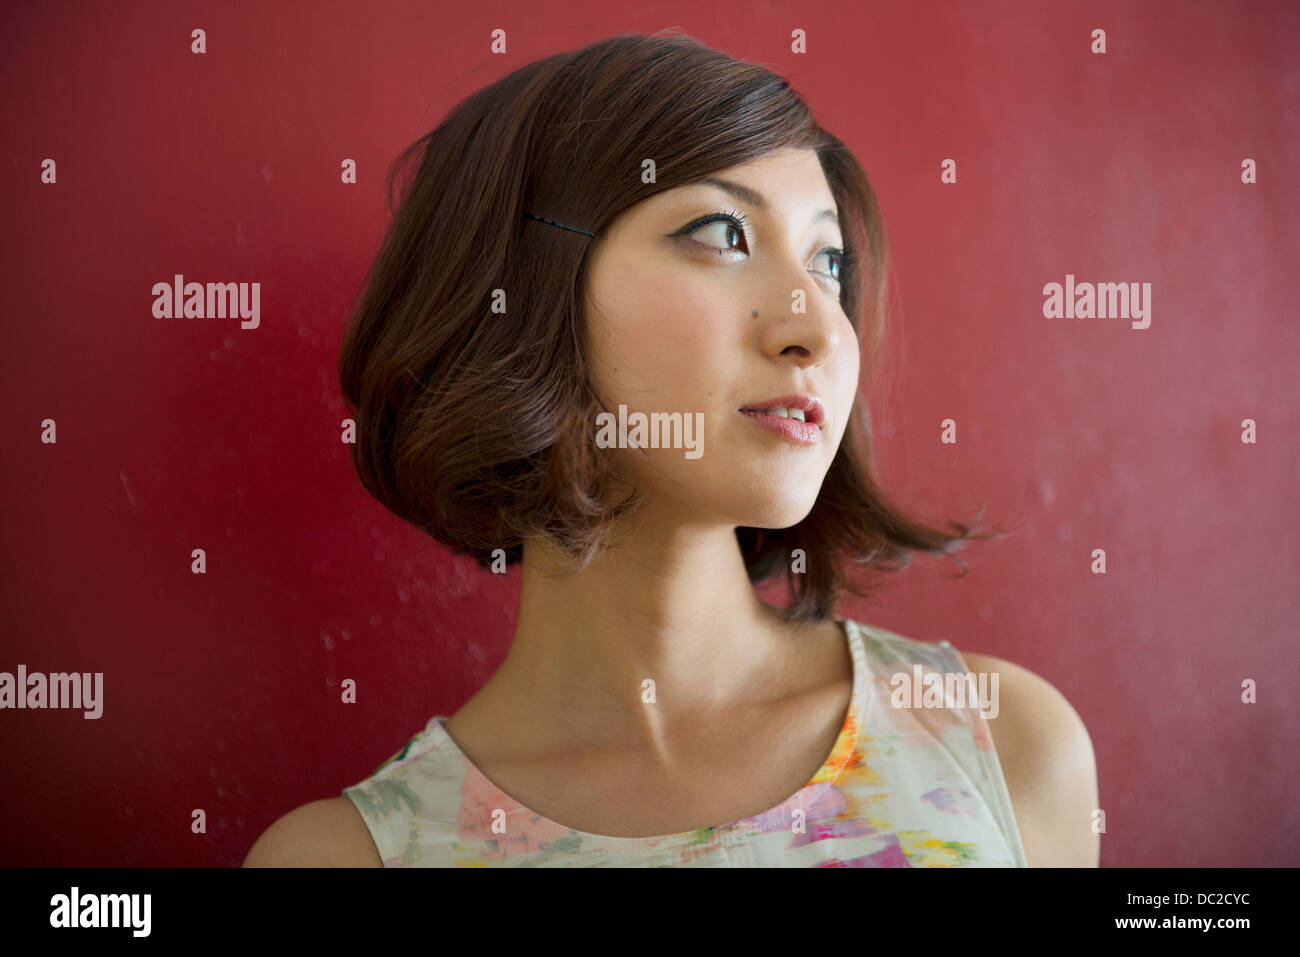 Woman against red wall looking into distance Stock Photo